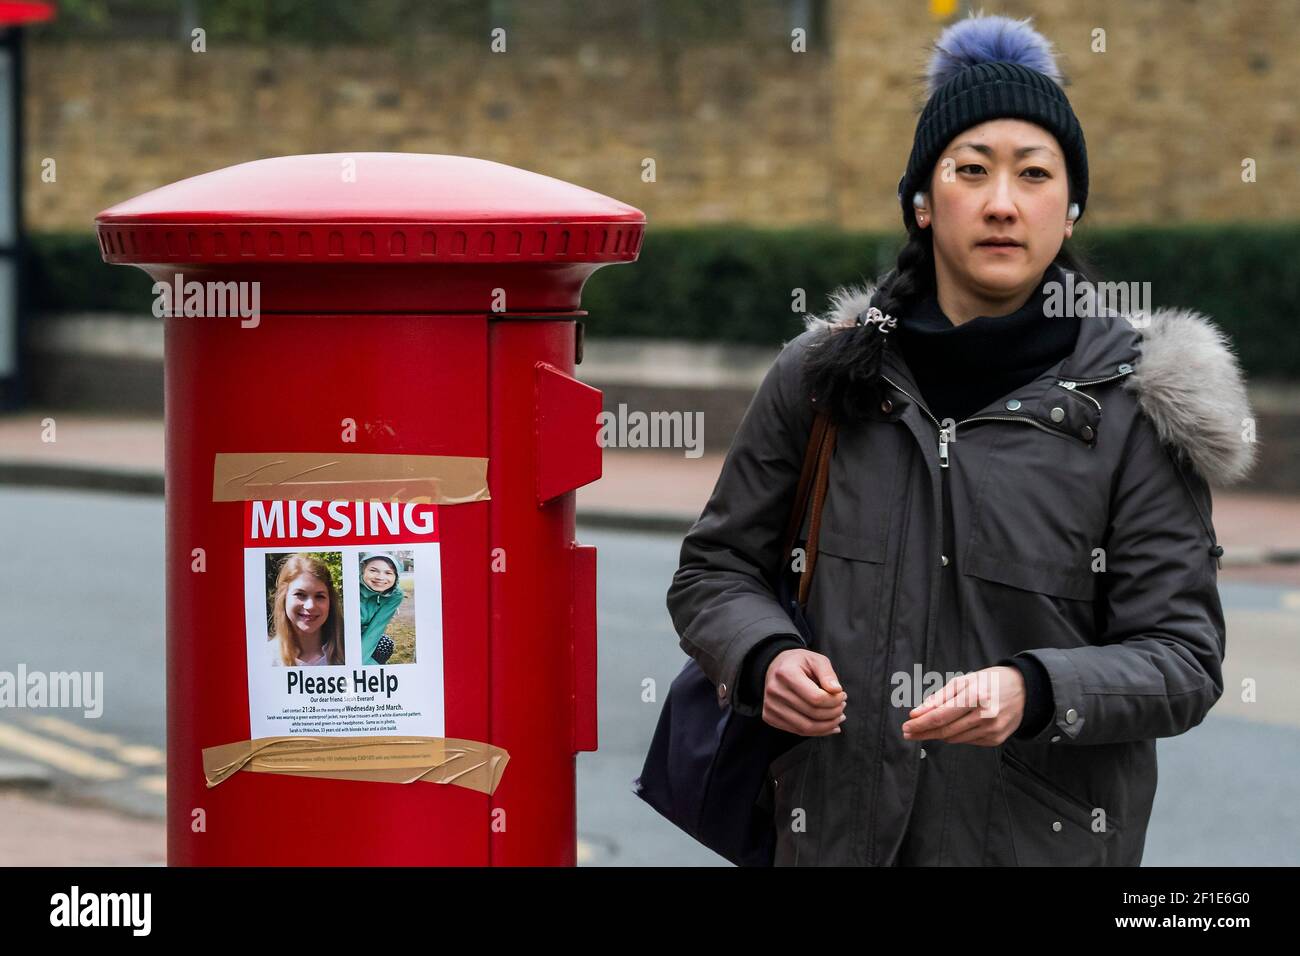 London, UK. 8th Mar, 2021. Missing signs (asking for any information), near Clapham Common, for Sarah Everard, who disappeared after 9:28 on March 3 somewhere between Clapham Junction and Brixton Credit: Guy Bell/Alamy Live News Stock Photo